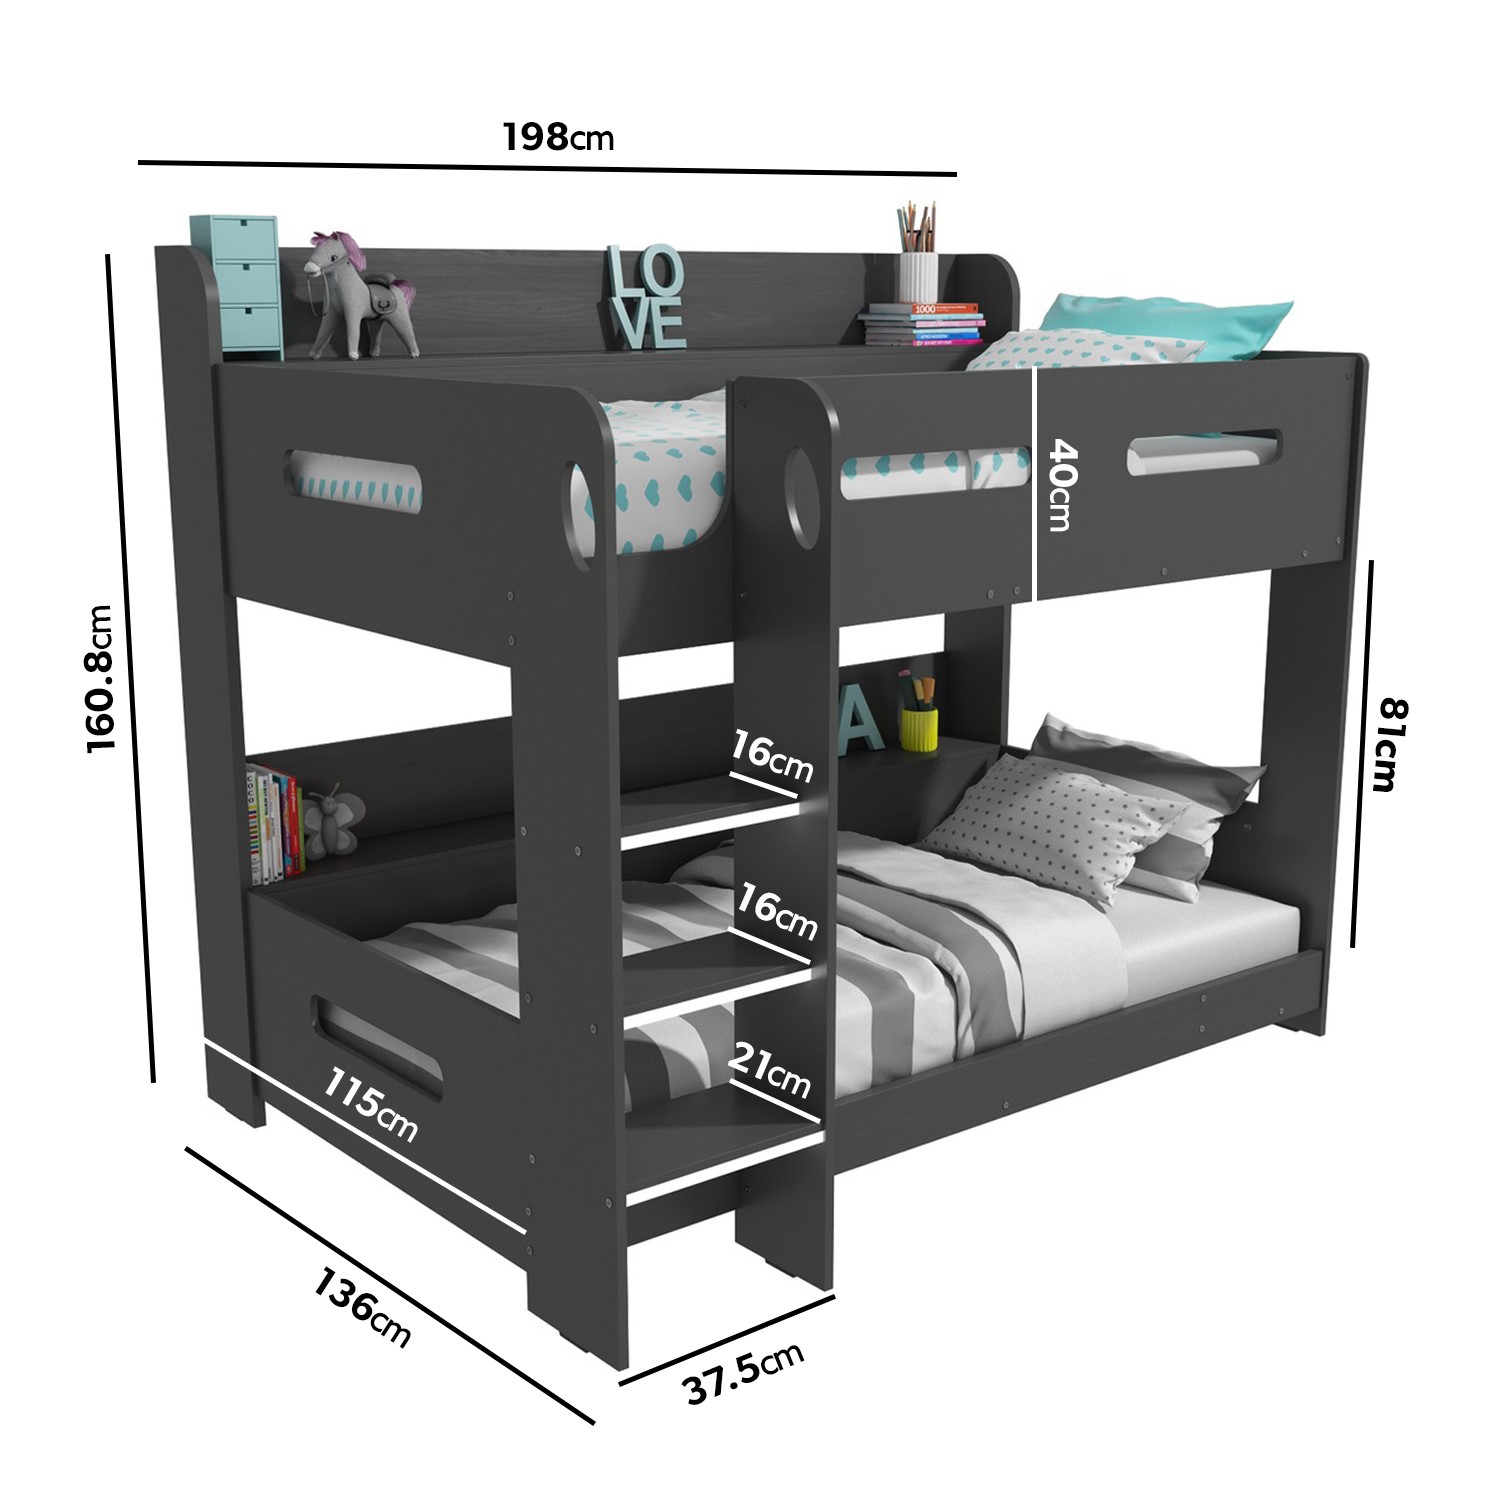 Dark Grey Wooden Bunk Bed With Shelves, Wooden Bunk Beds With Shelves